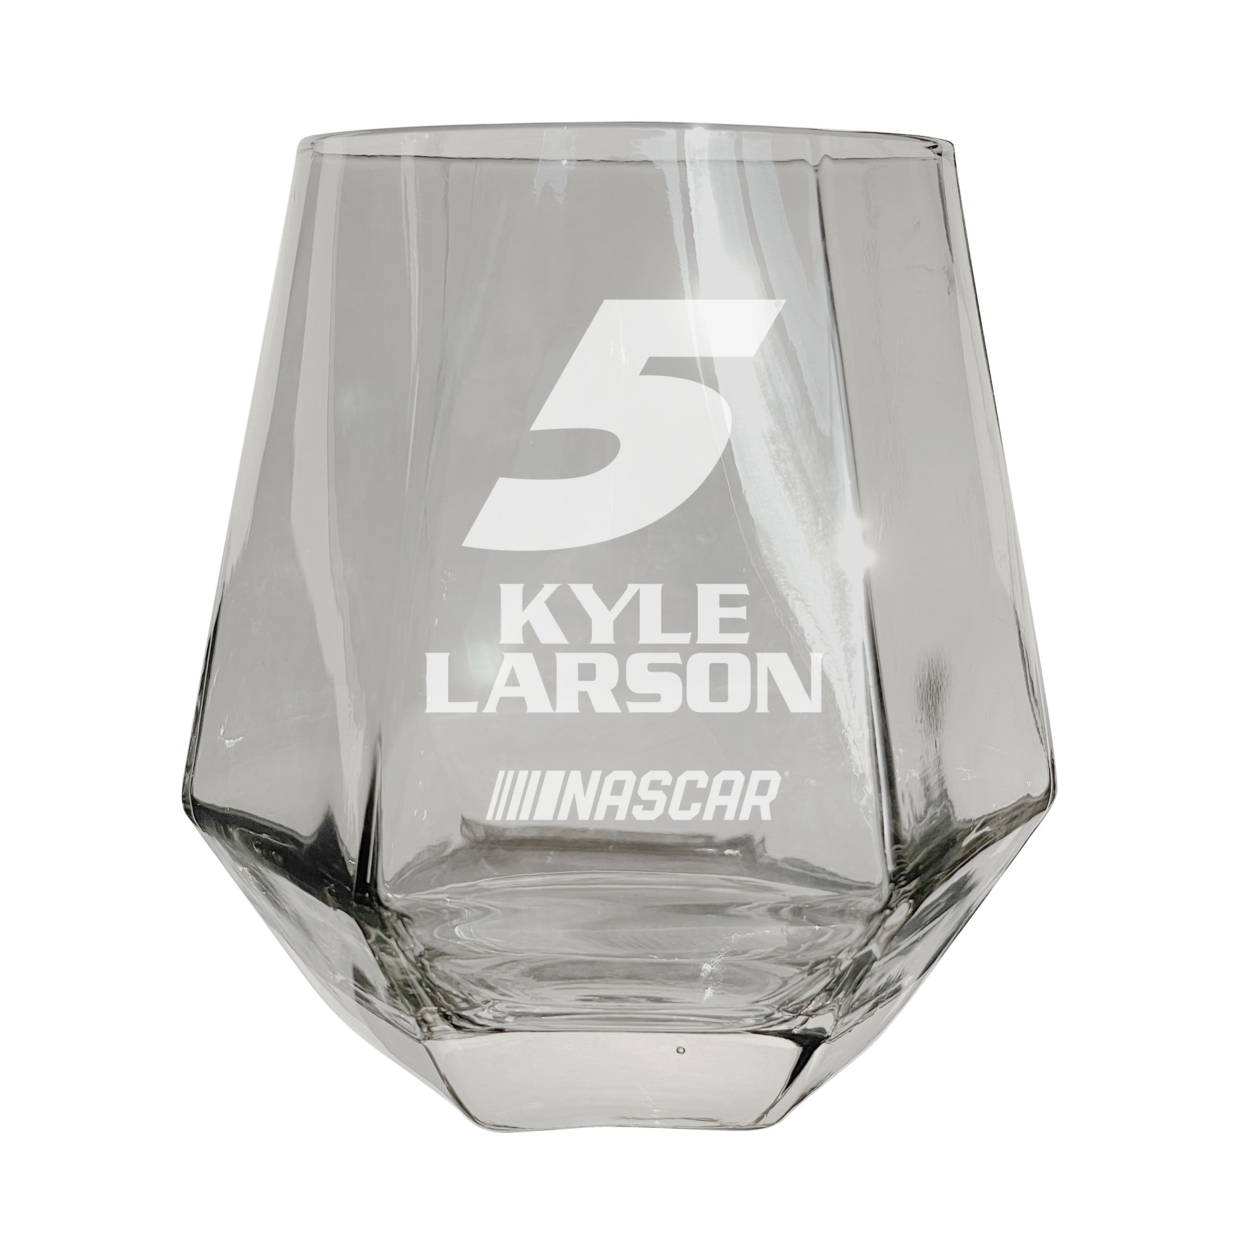 #5 Kyle Larson Officially Licensed 10 Oz Engraved Diamond Wine Glass - Clear, Single